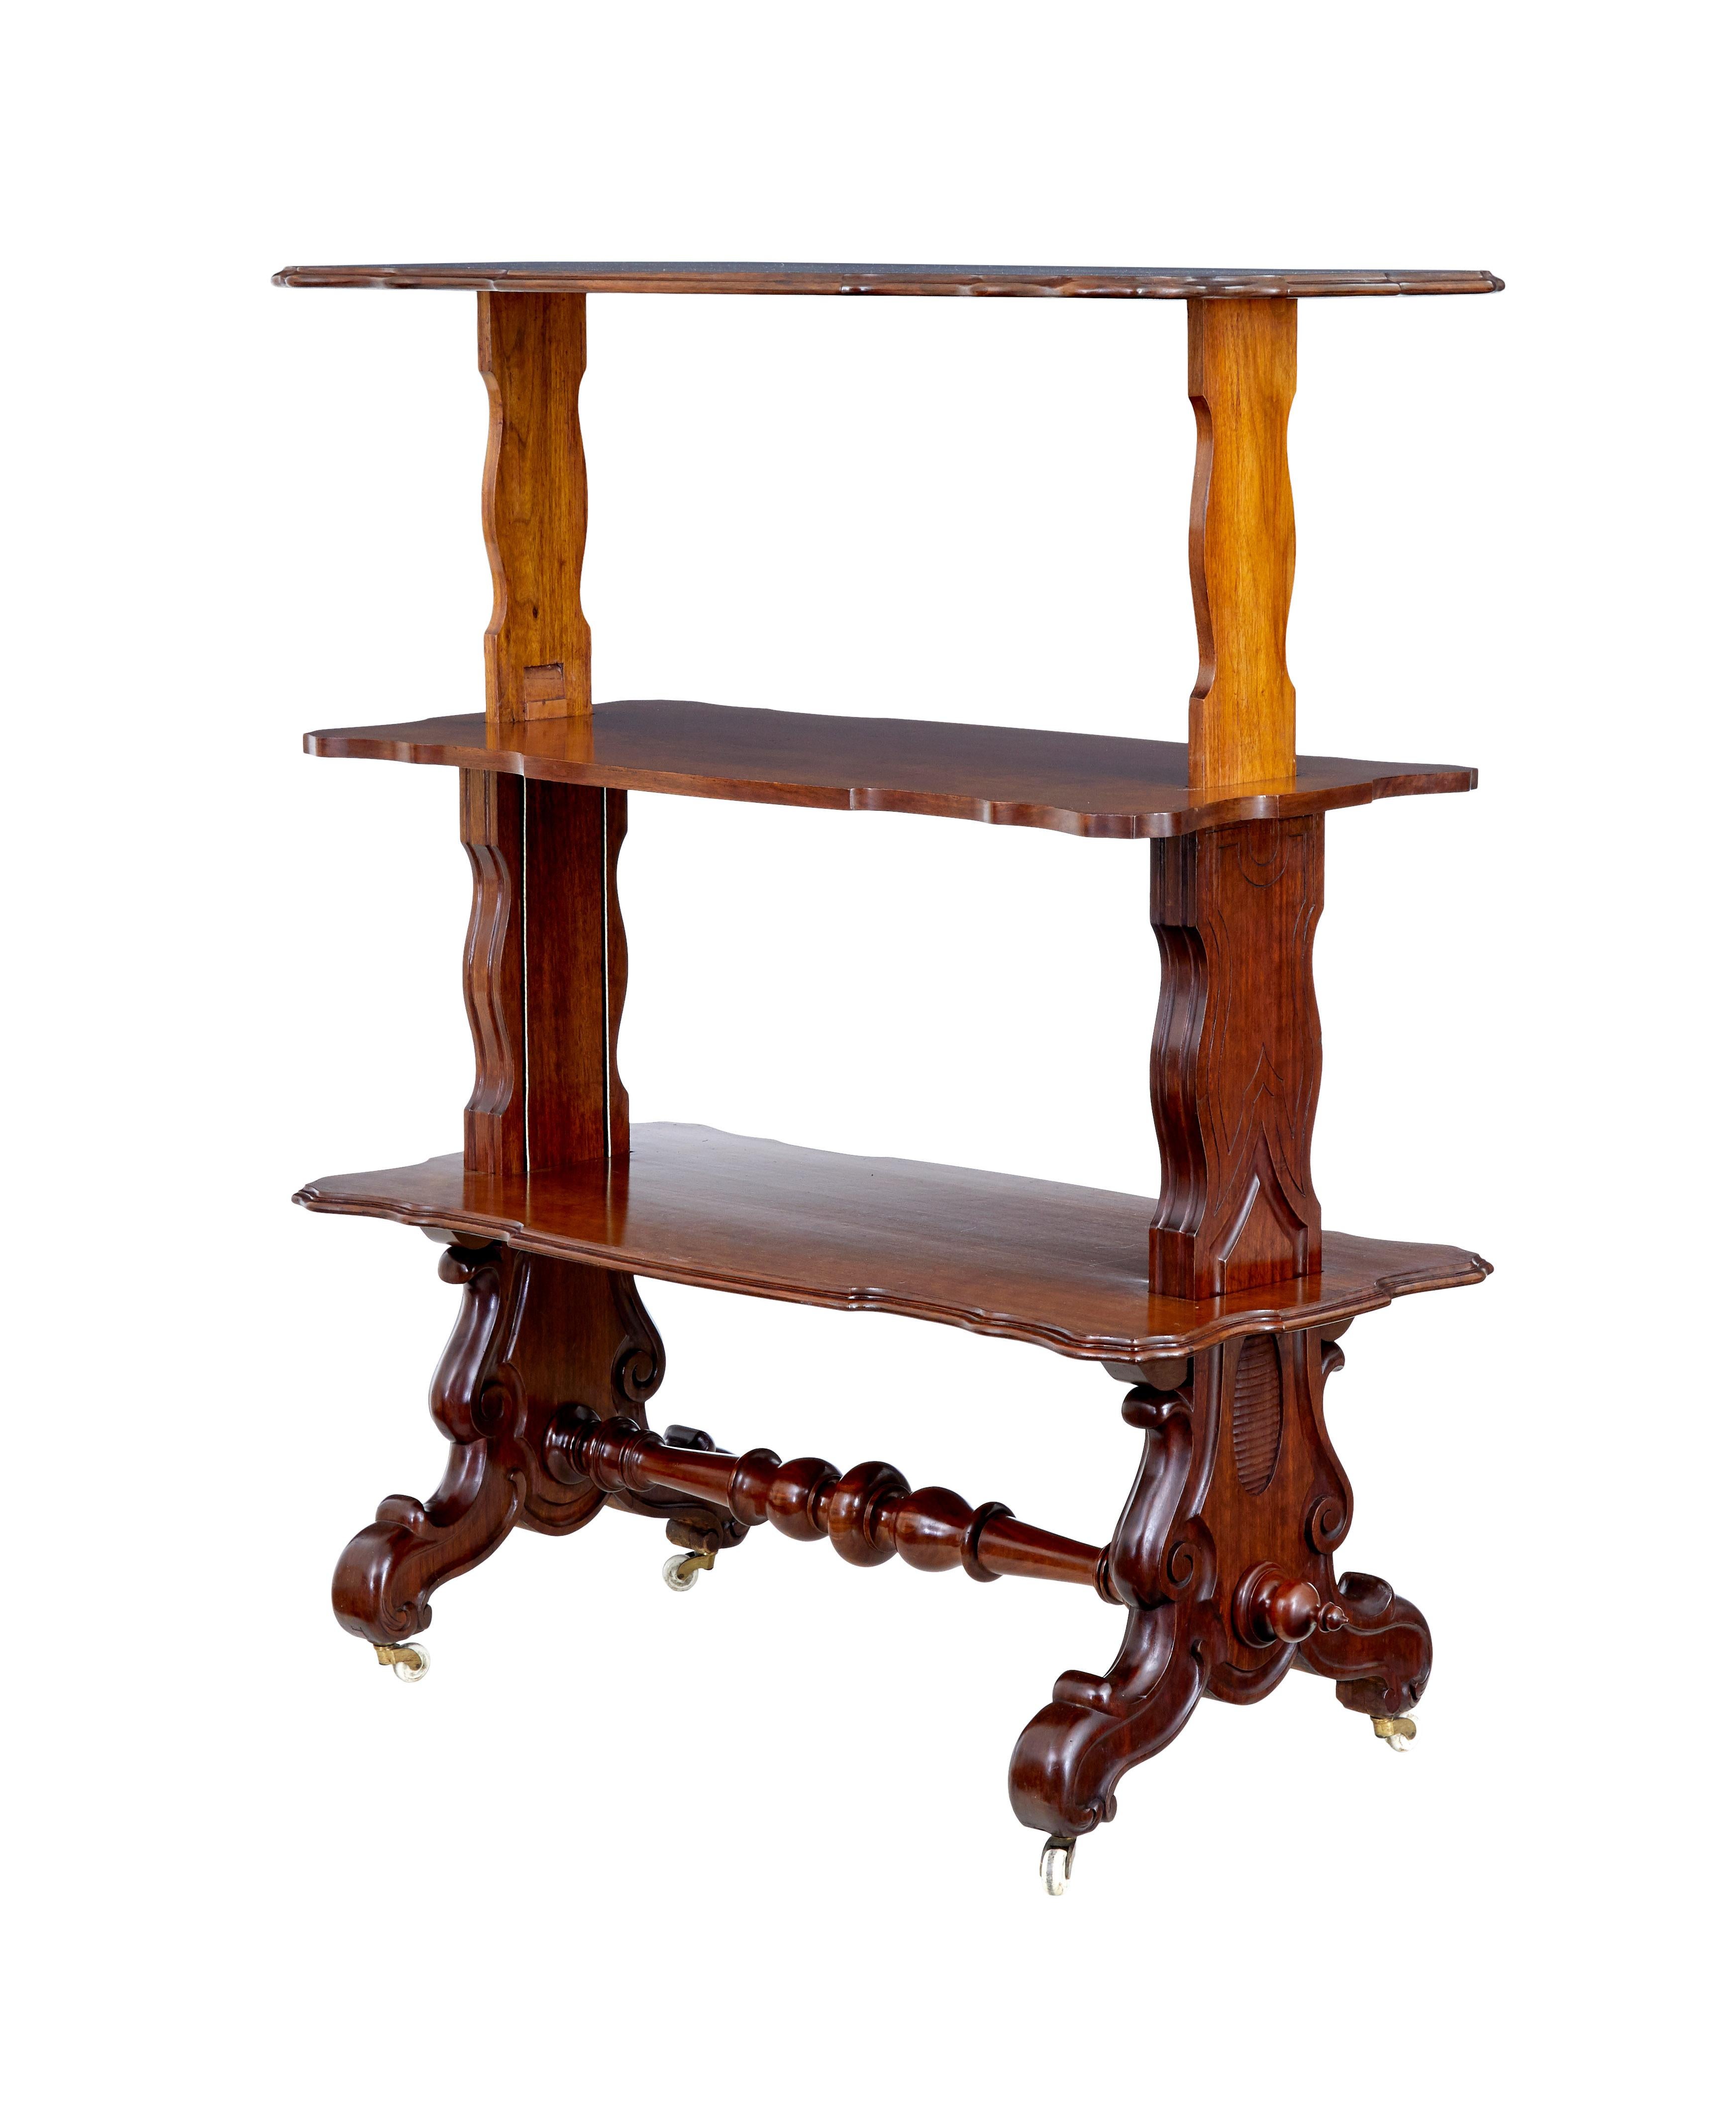 19th century Victorian walnut metamorphic dumb waiter circa 1880.

Rectangular top with shaped decorative edging.  Top rises up to form 3 serving surfaces.  Carved trestle ends, united by turned stretcher.  Tiers are pulled up and pushed down by